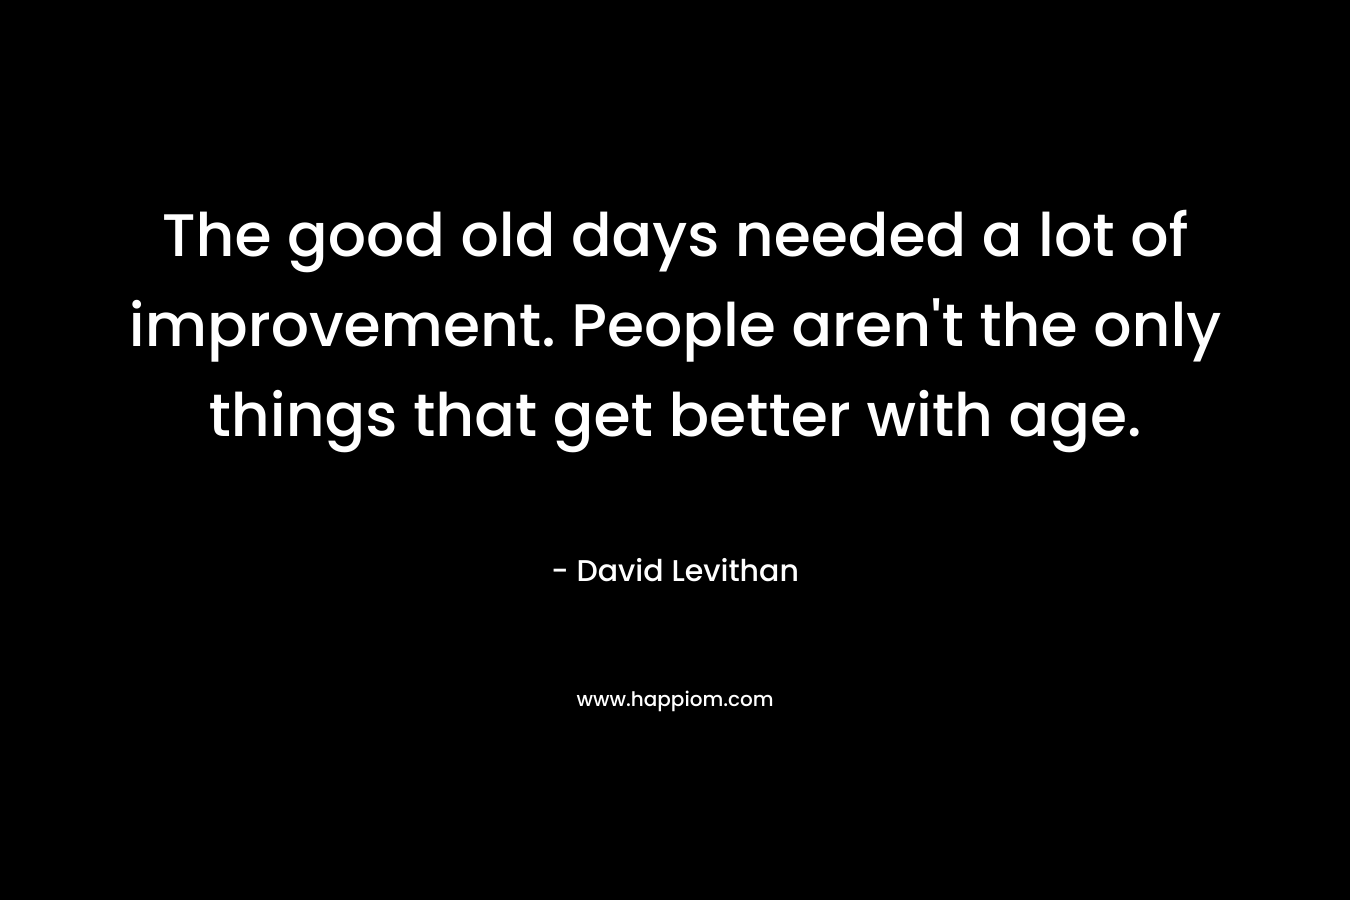 The good old days needed a lot of improvement. People aren't the only things that get better with age.